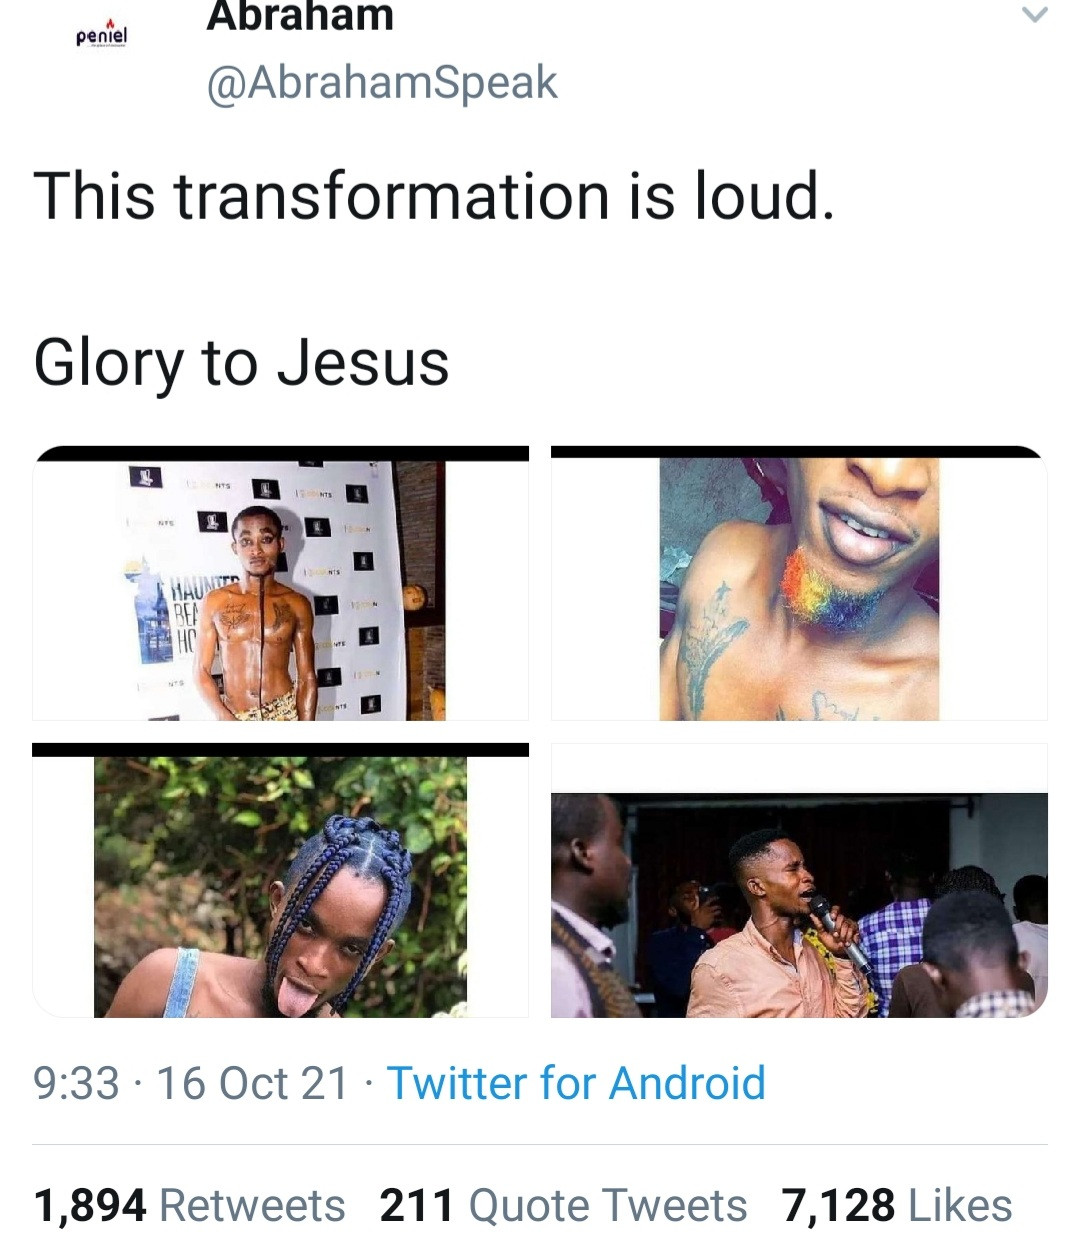 A man's transformation after he was "arrested by Christ" has gone viral on Twitter